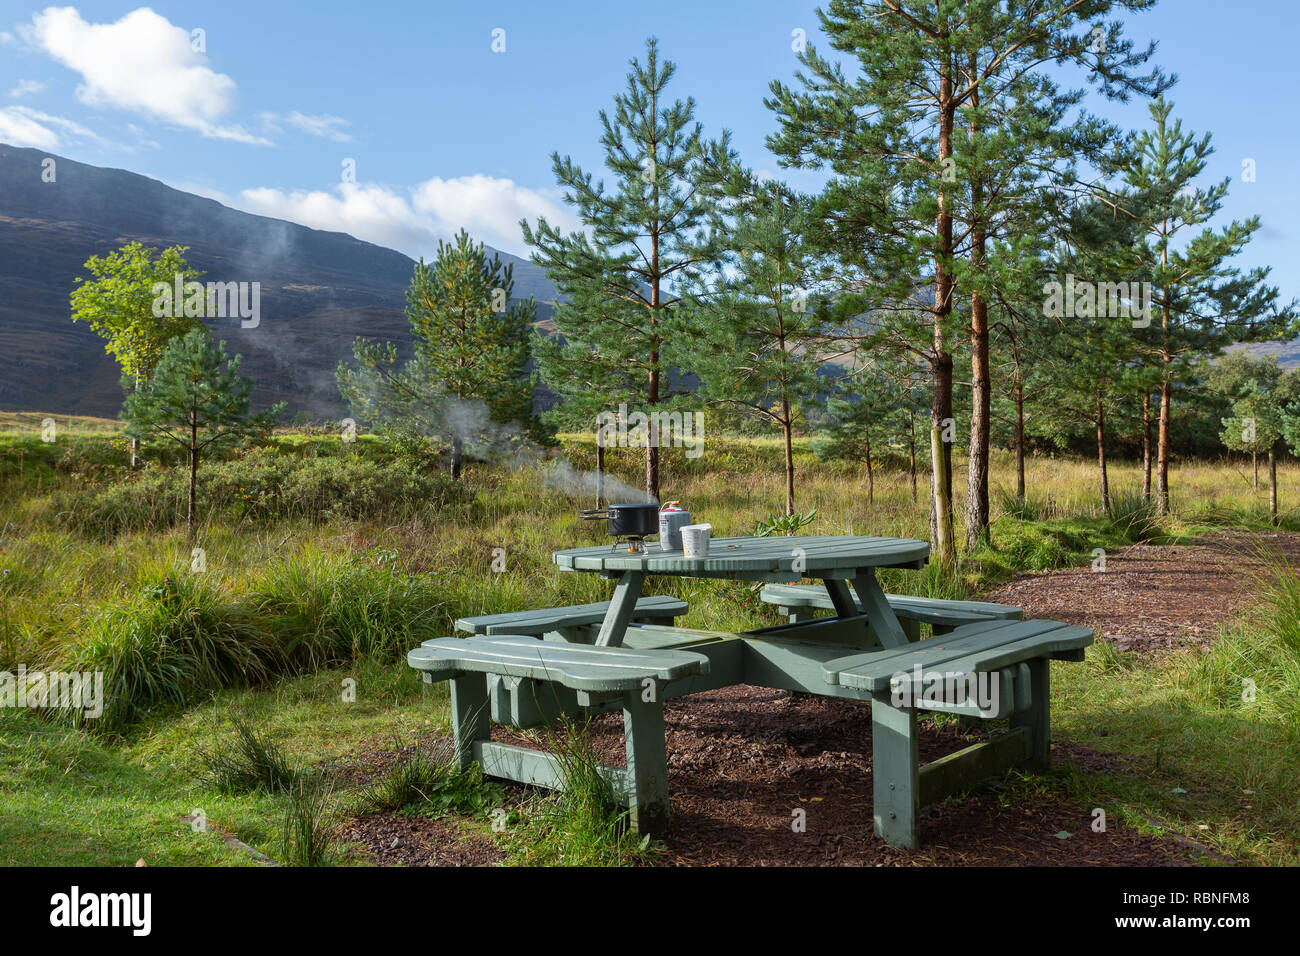 Breakfast being prepared on a camping stove mounted on a picnic table, near Torridon village, Scotland Stock Photo